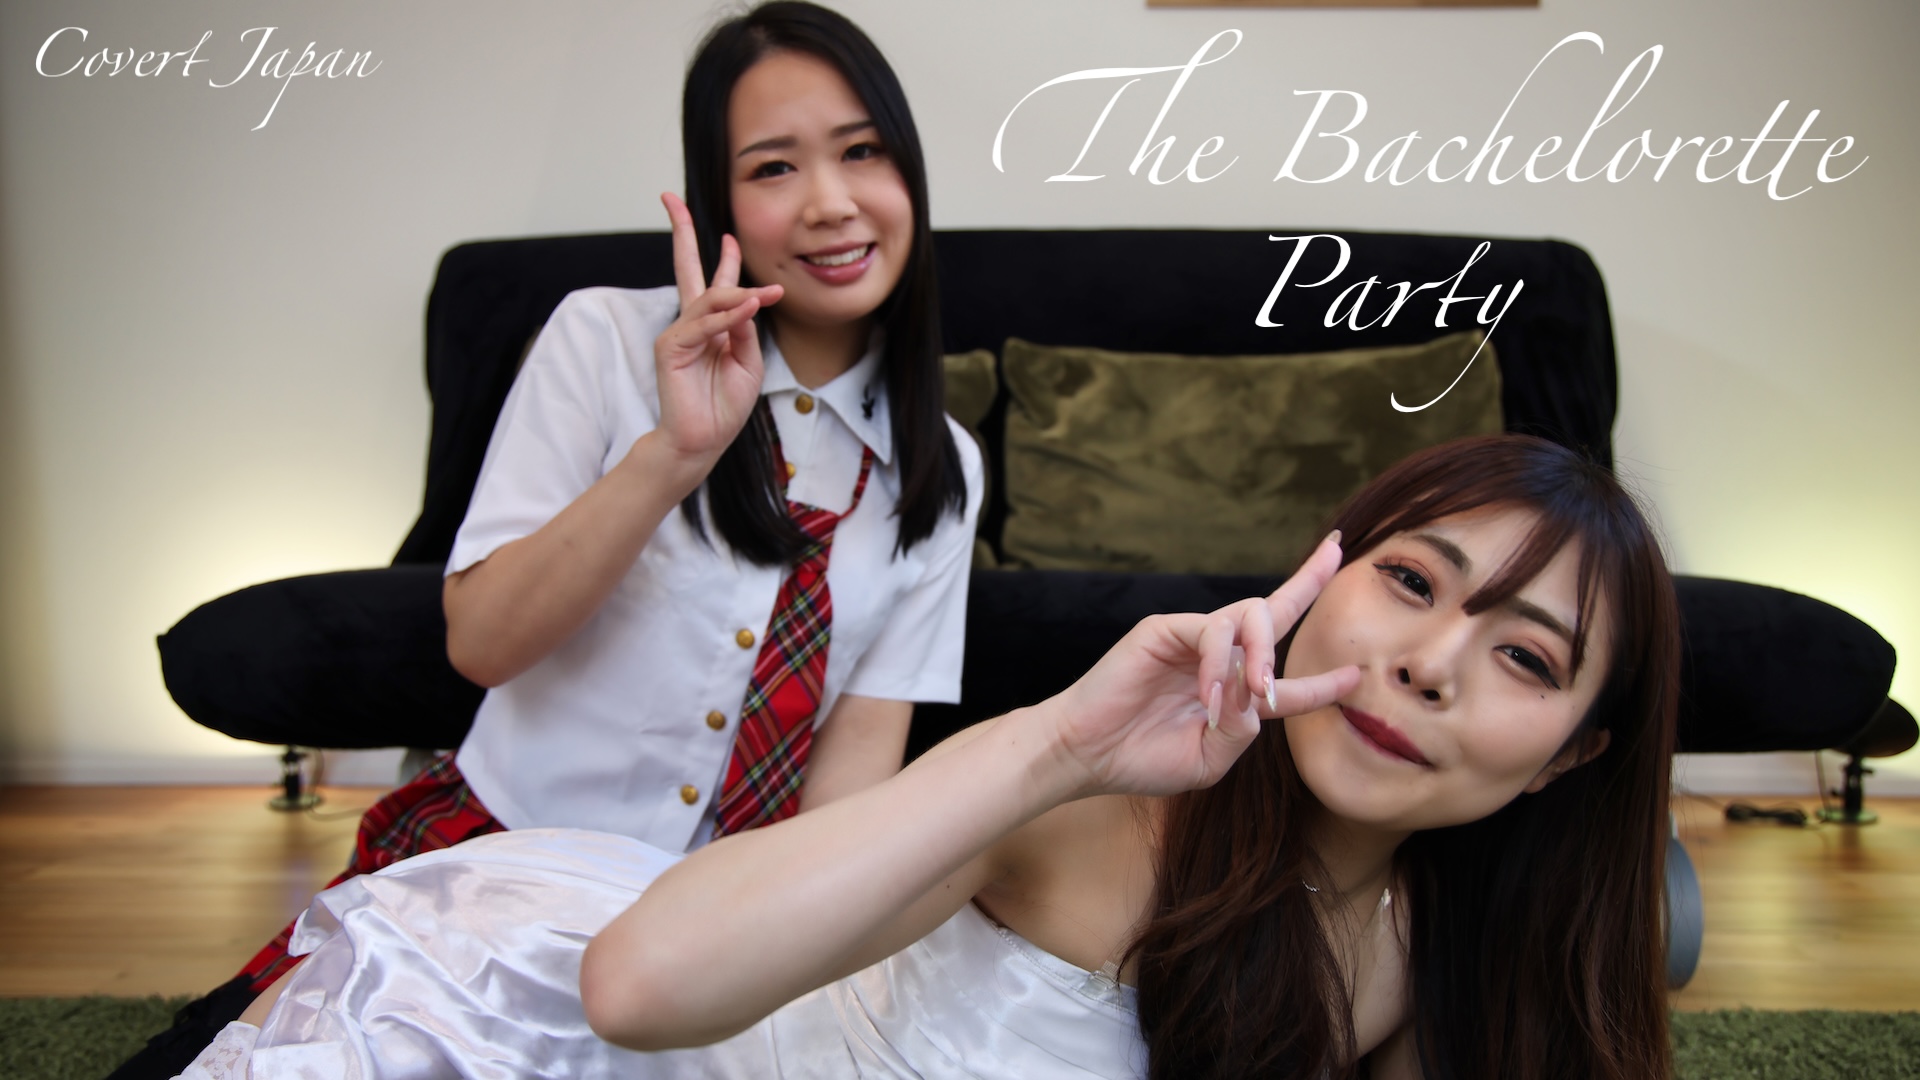 CovertJapan Misa, Mitsuka – The Bachelorette Party